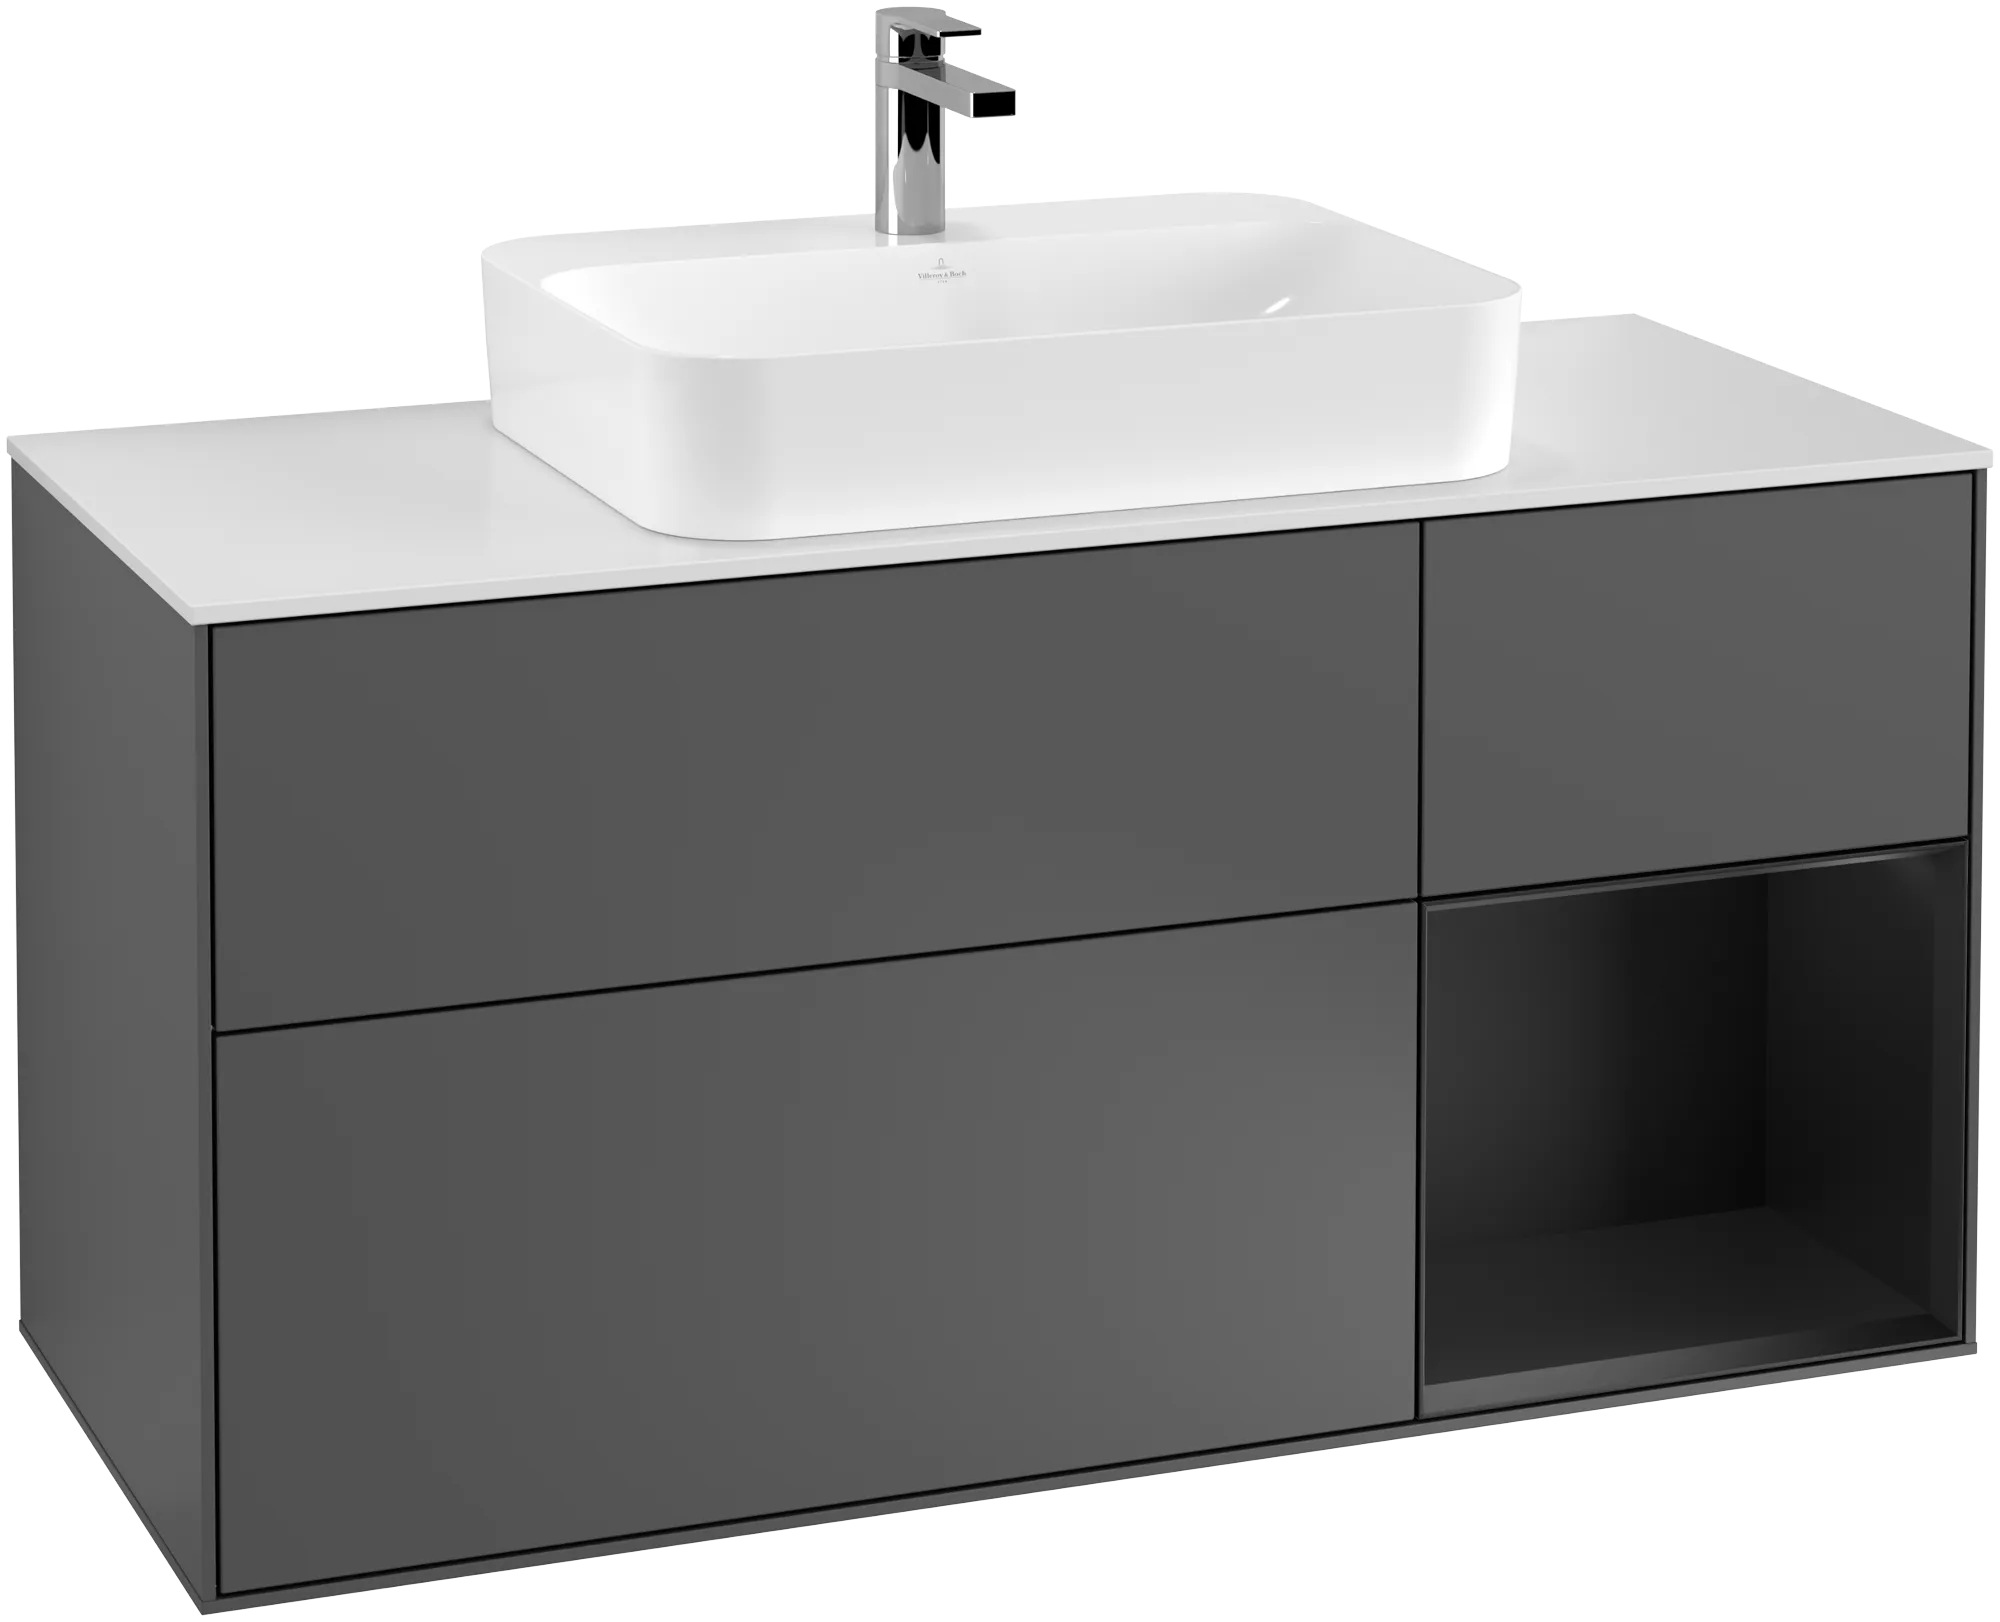 VILLEROY BOCH Finion Vanity unit, with lighting, 3 pull-out compartments, 1200 x 603 x 501 mm, Anthracite Matt Lacquer / Black Matt Lacquer / Glass White Matt #G421PDGK resmi